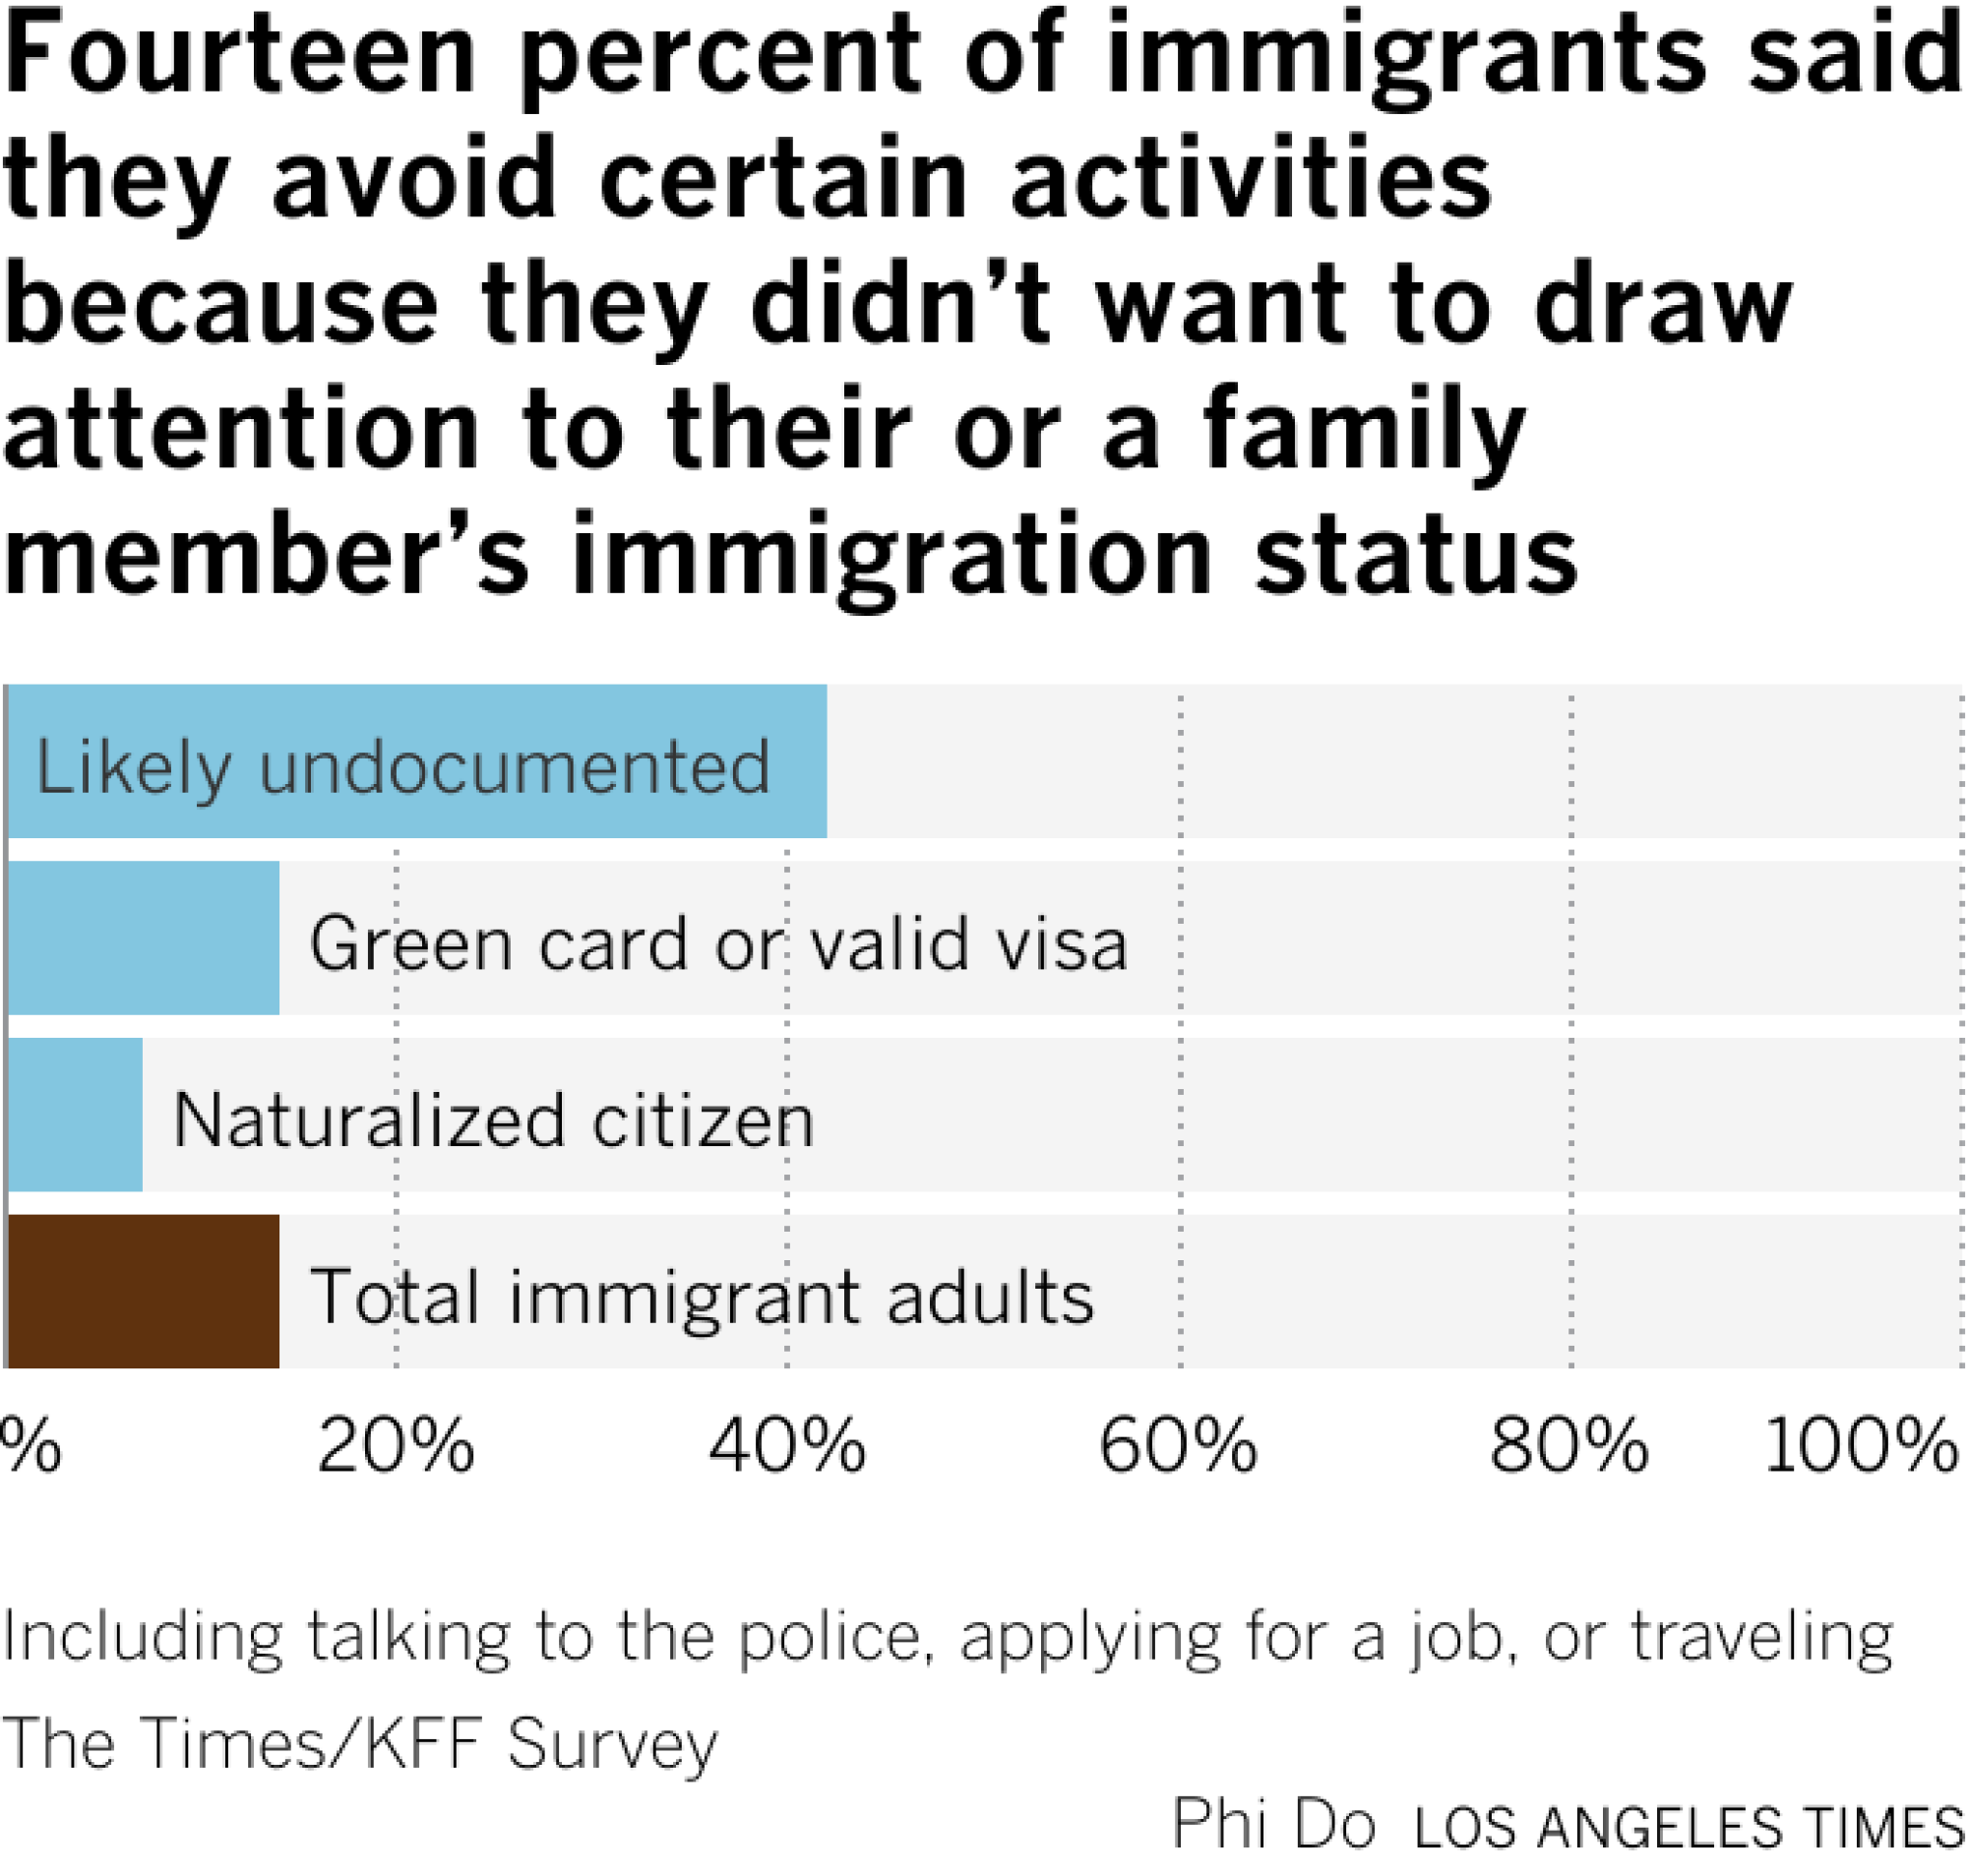 Horizontal bar chart showing how many responded yes to whether they avoid certain activities because they didn’t want to draw attention to their or a family member’s immigration status